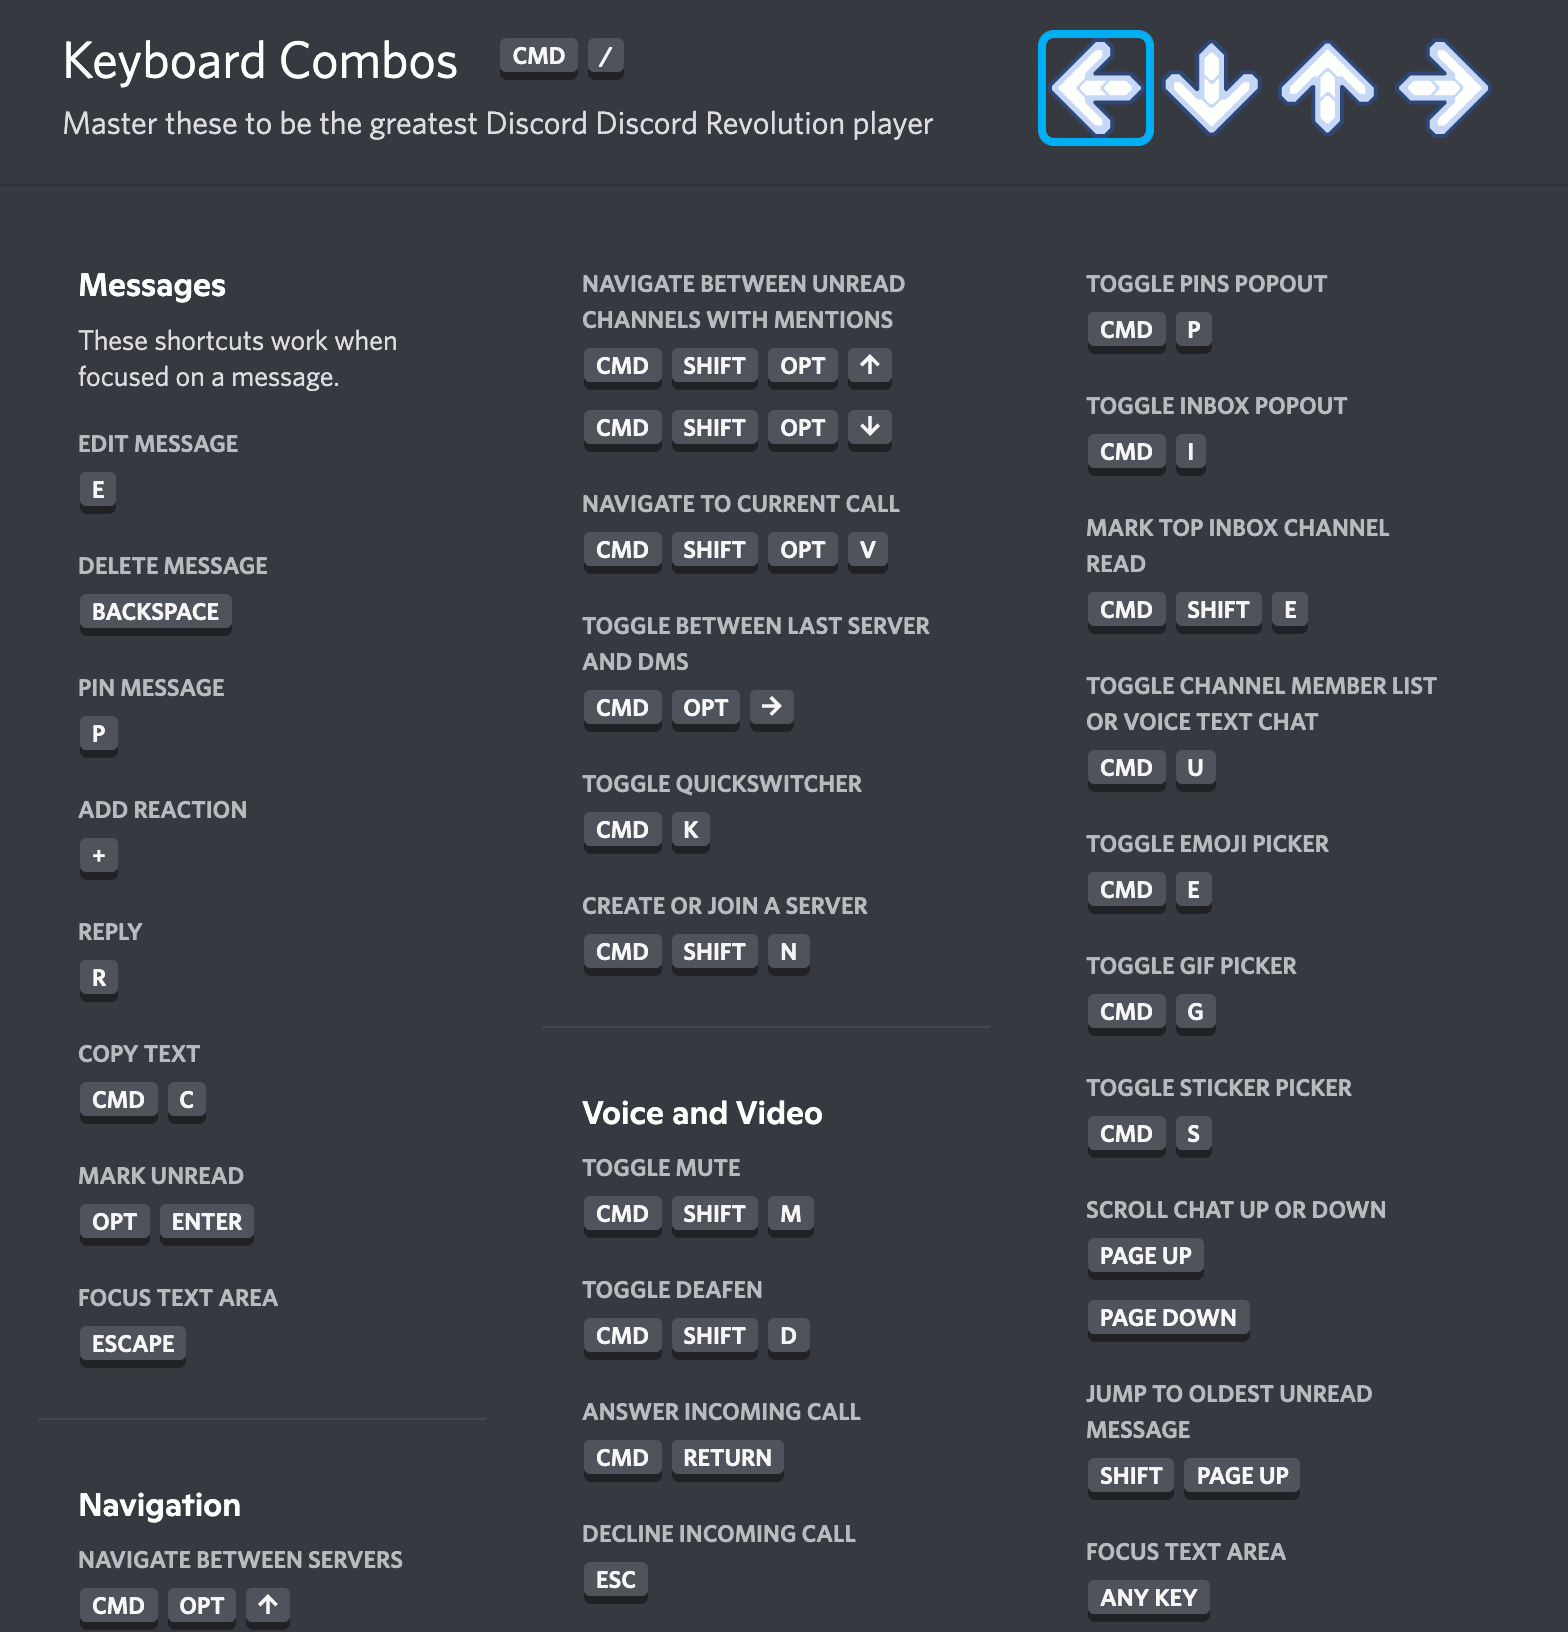 The Discord keyboard shortcut overlay shows different shortcuts grouped by Feature Areas like messages, voice and video, and navigation.